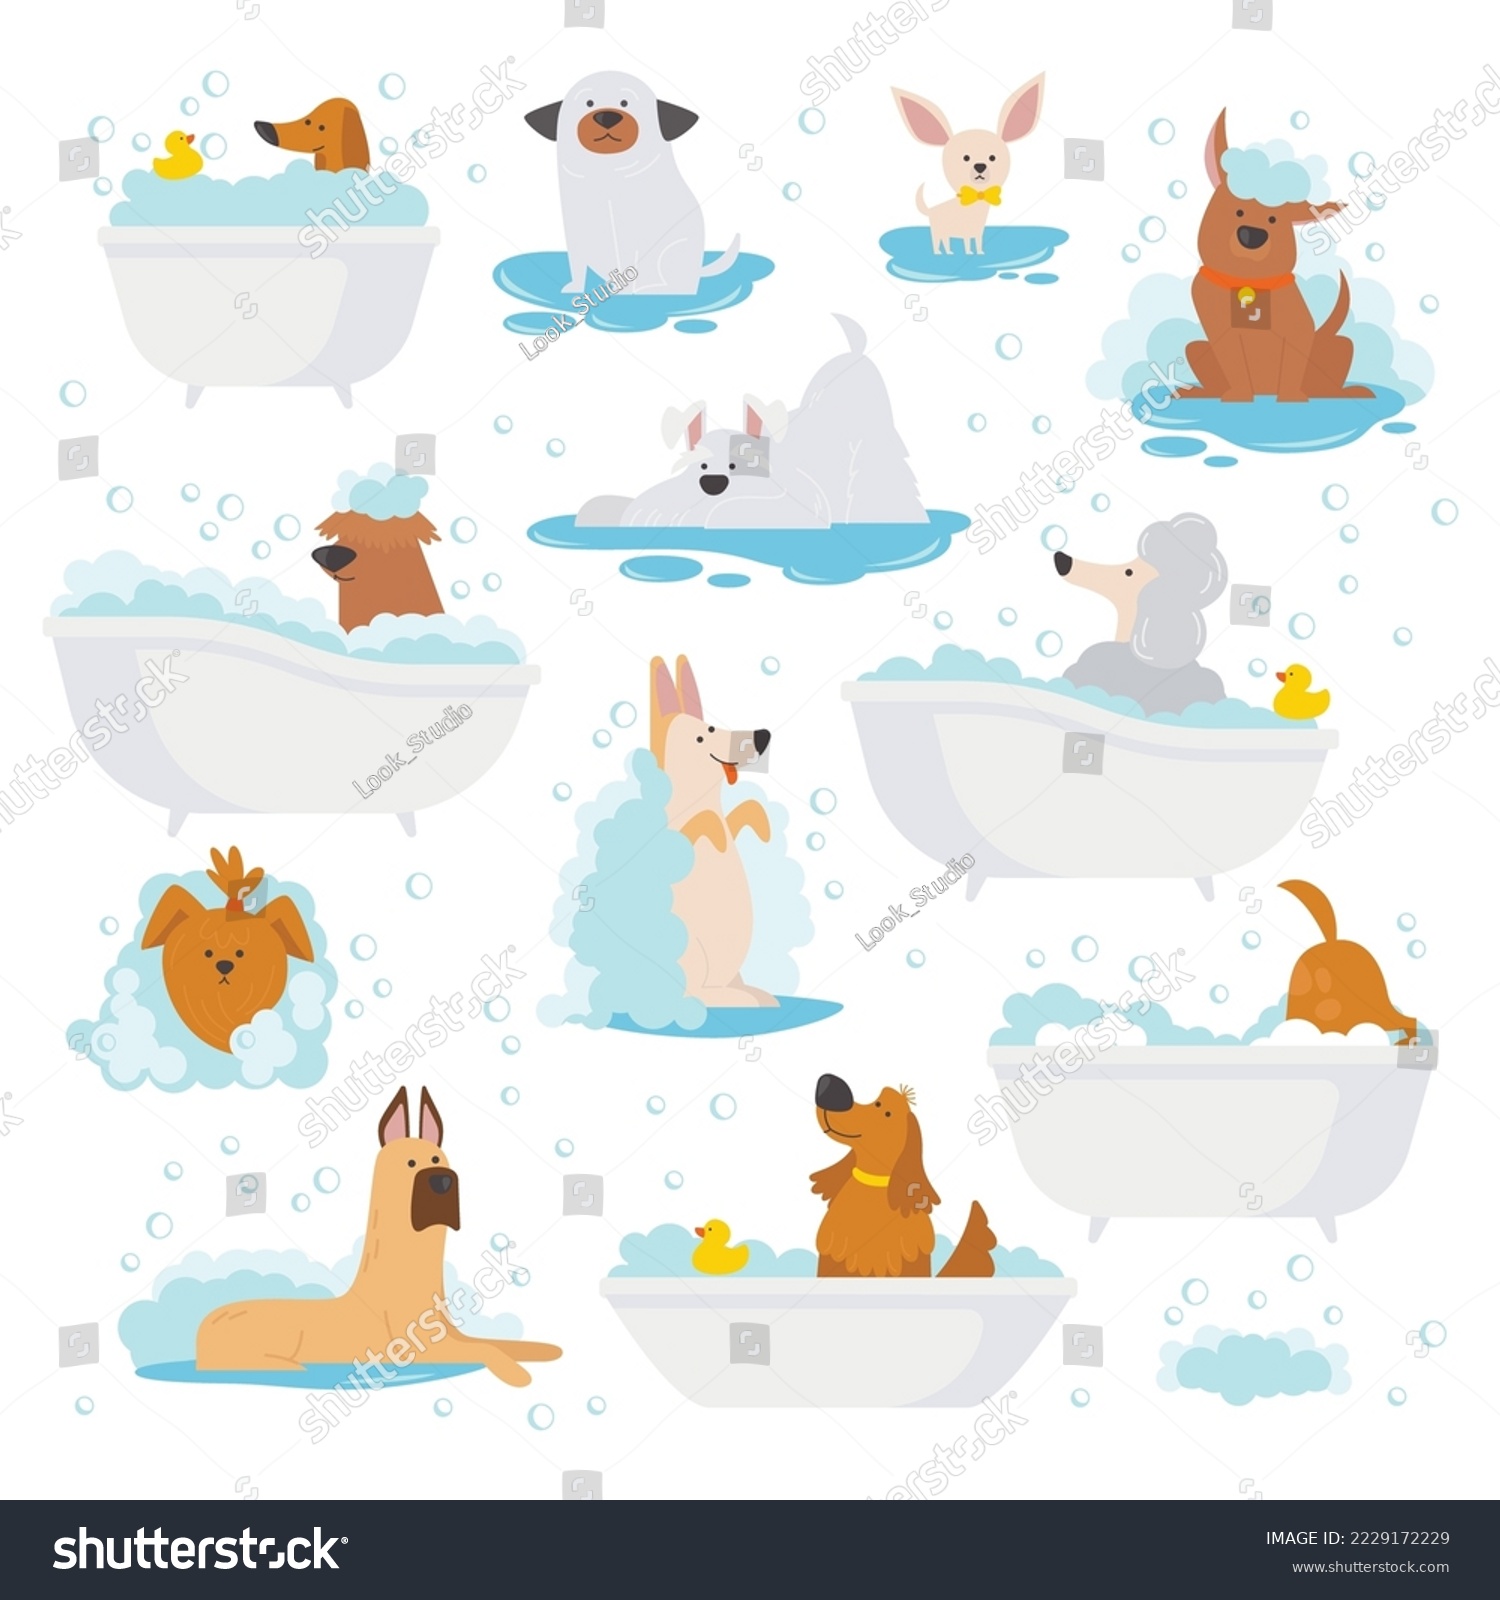 SVG of Dogs bathe flat icons set. Care of different dogs. Happy chihuahua, spaniel, poodle. Wash coat with shampoo, special organic products. Love and care for pets. Color isolated illustrations svg